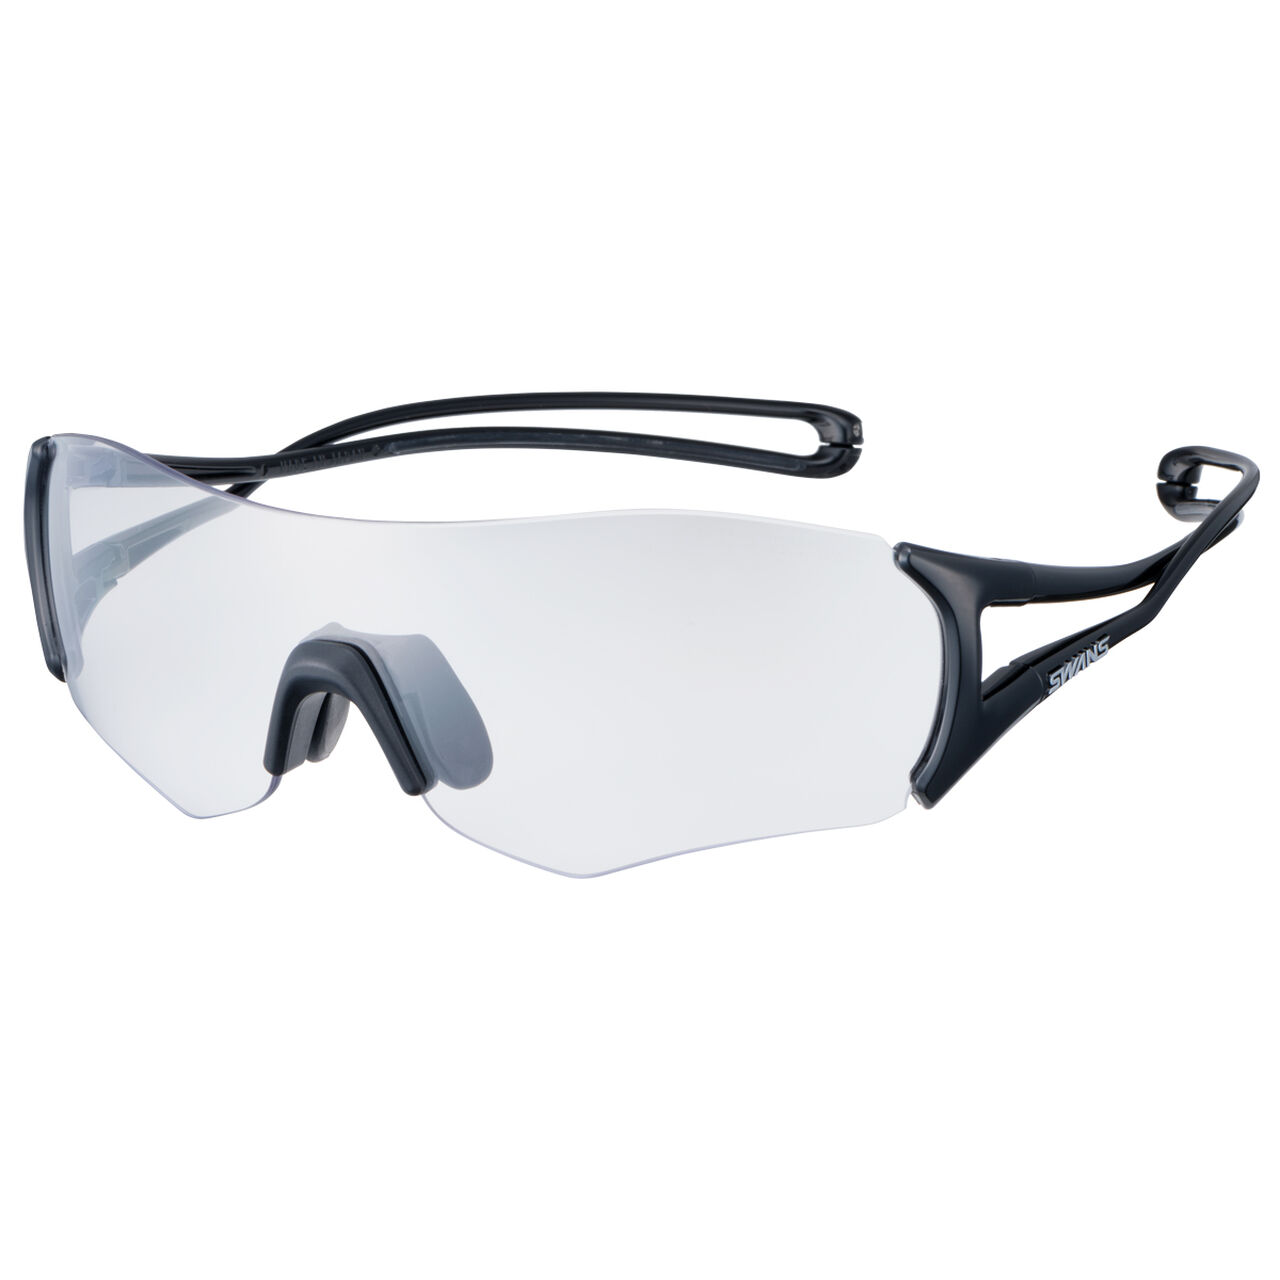 E-NOX EIGHT8 0066 BK Photochromic Clear to Smoke,Opt1, large image number 0